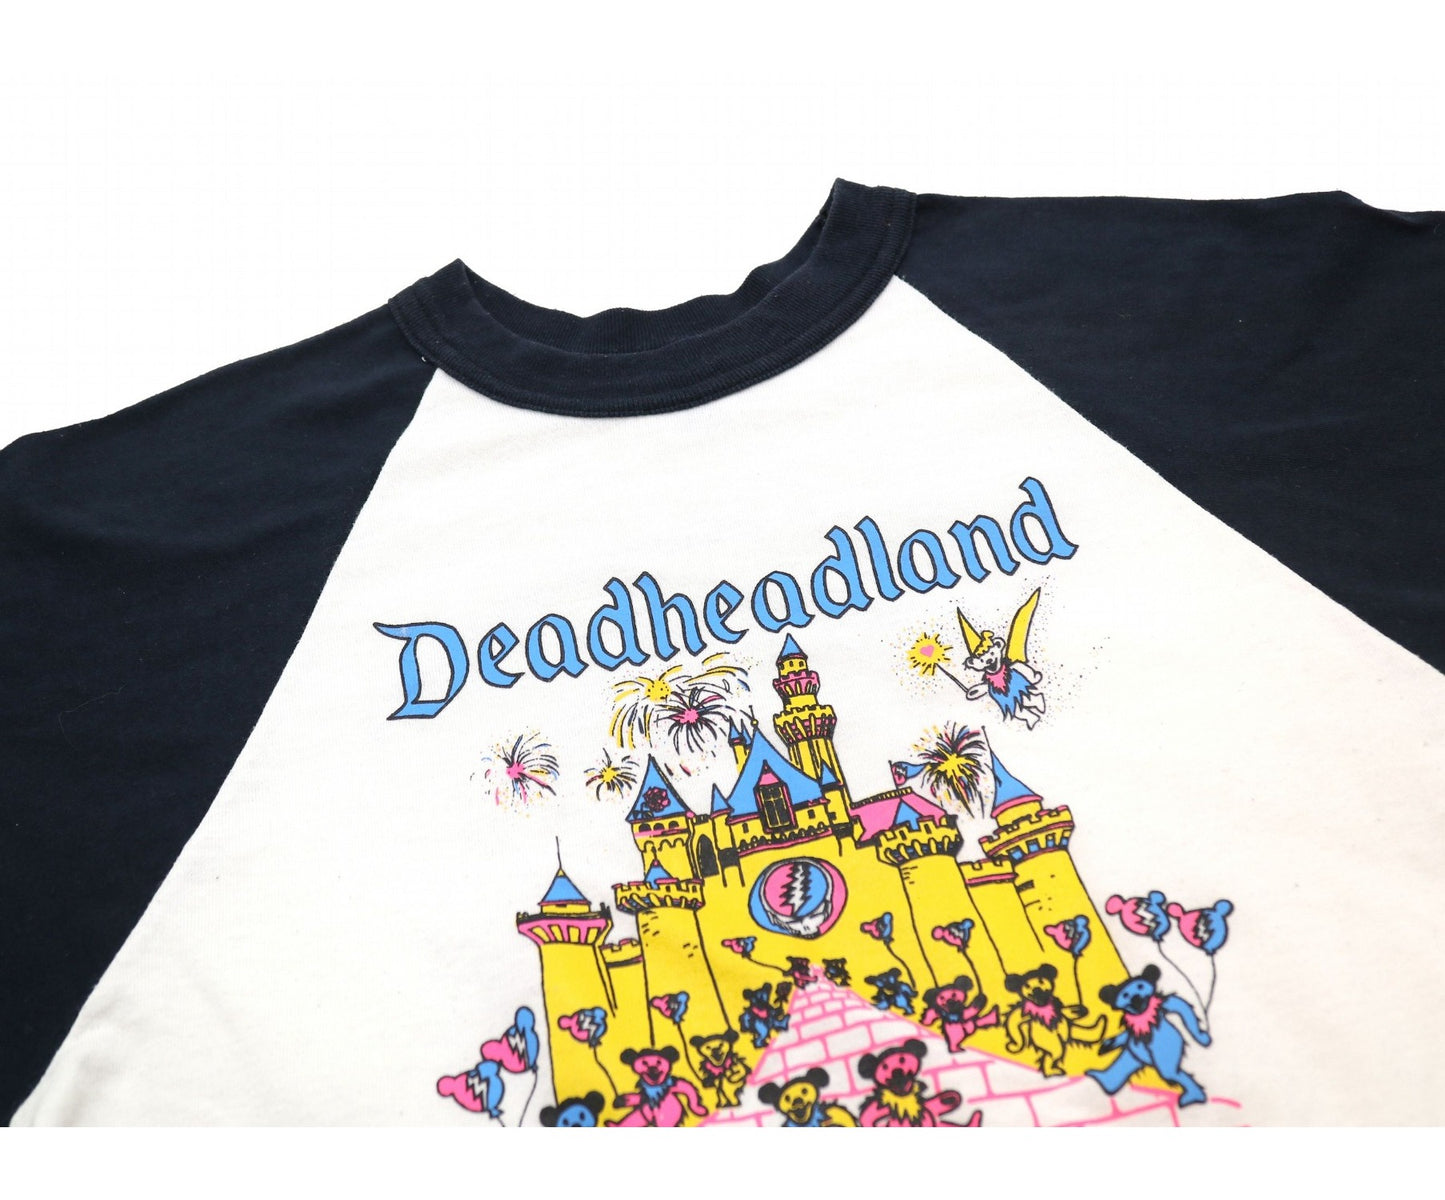 [Pre-owned] [Vintage Clothes] Grateful Dead Band Long Sleeve Cut & Sew